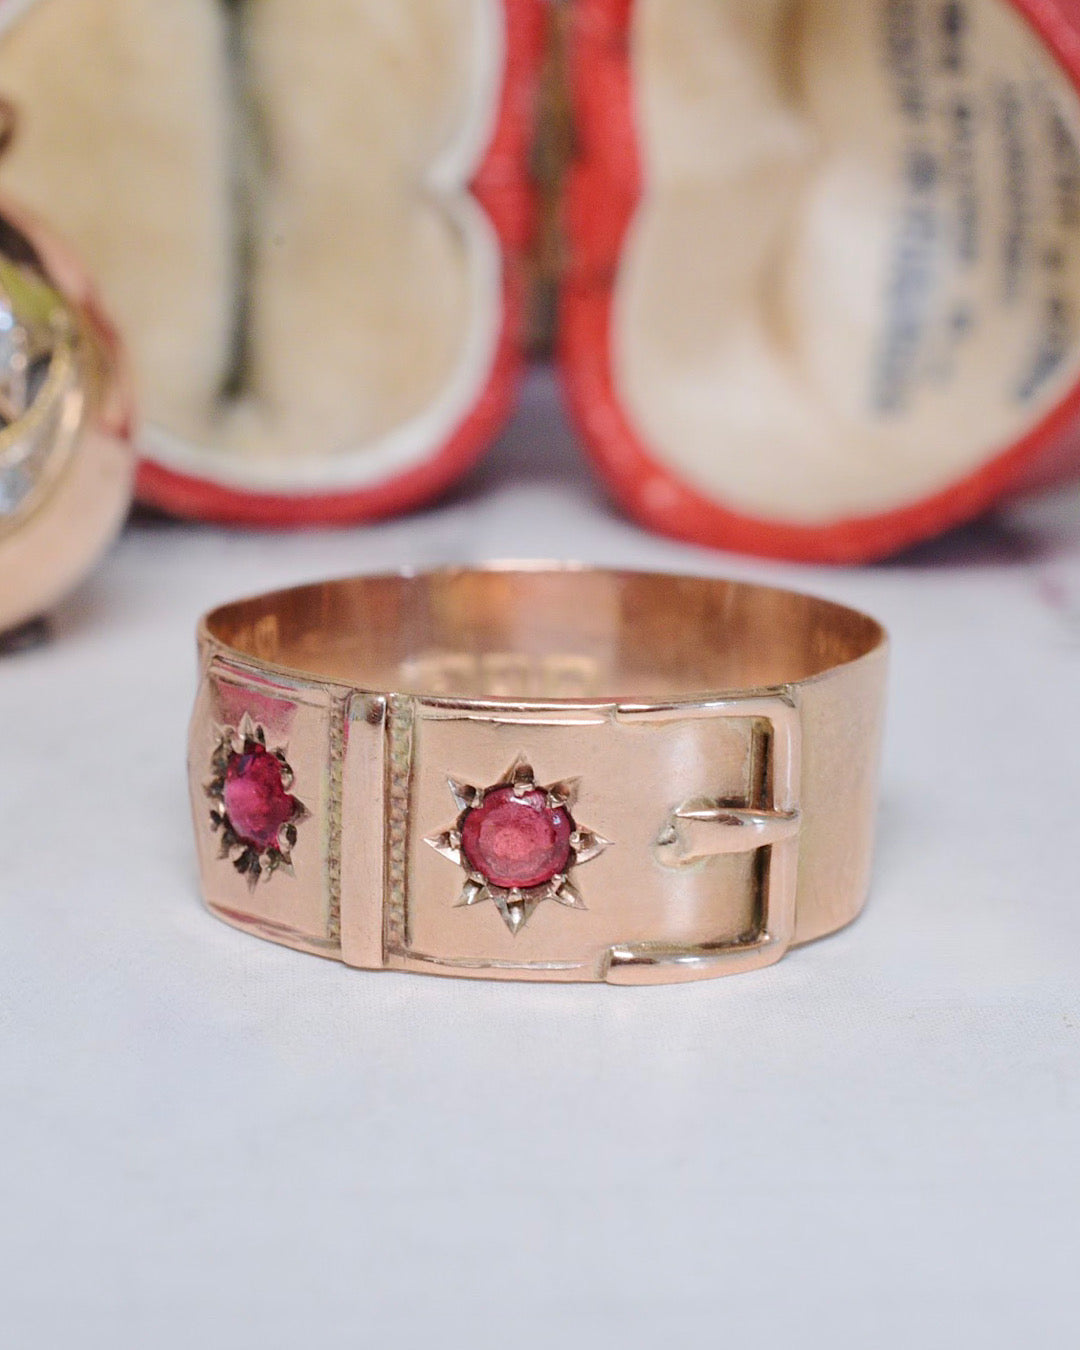 Antique Australian 9ct Rose Gold Garnet Doublet Ring By Willis and Sons Circa 1910